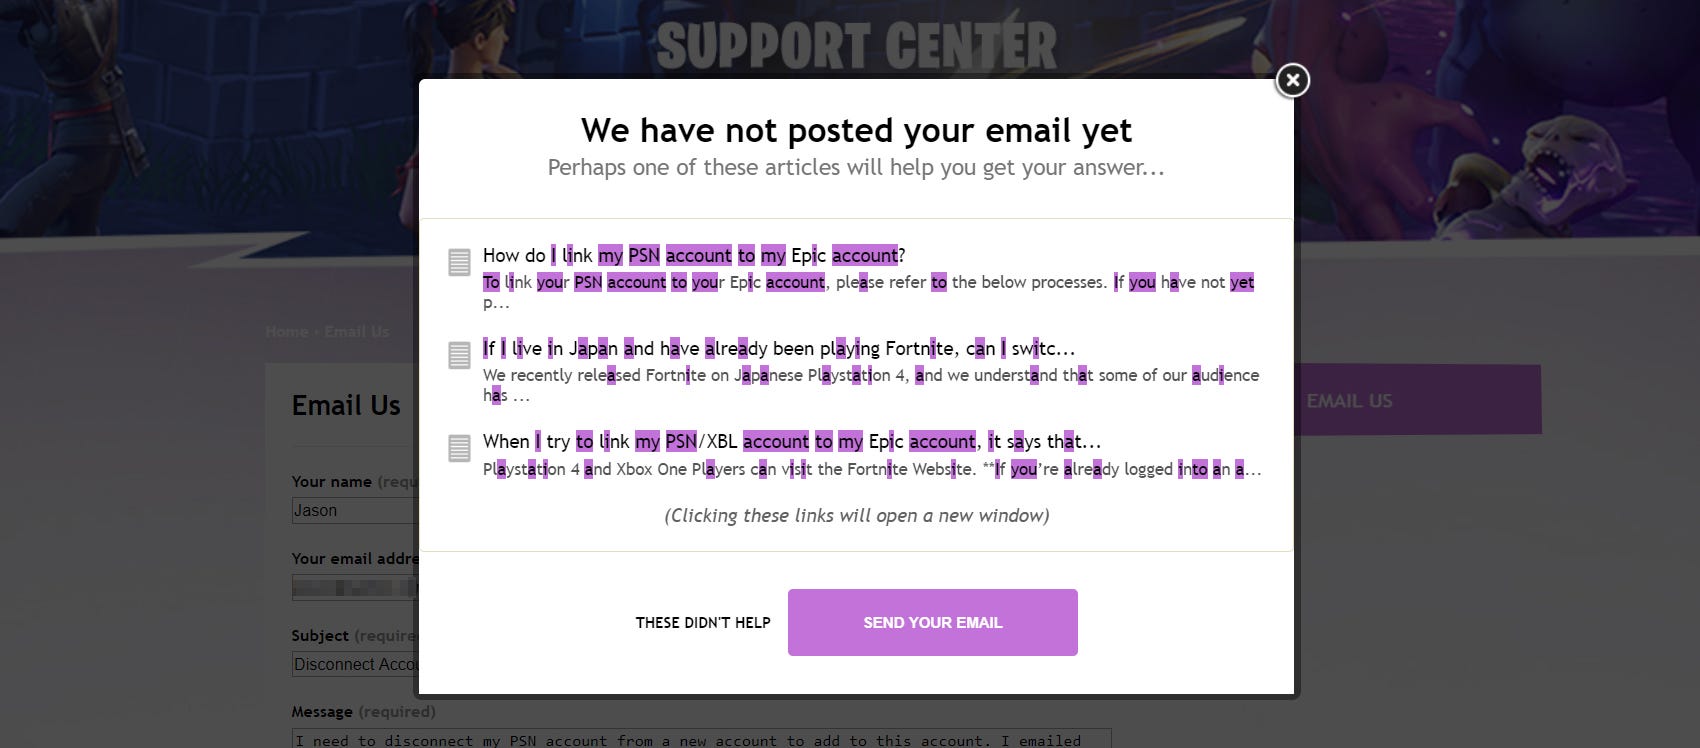 to alleviate the amount of emails cs has to deal with they provide you with a list of potential help from the forums this is standard practice - fortnite account emails and passwords